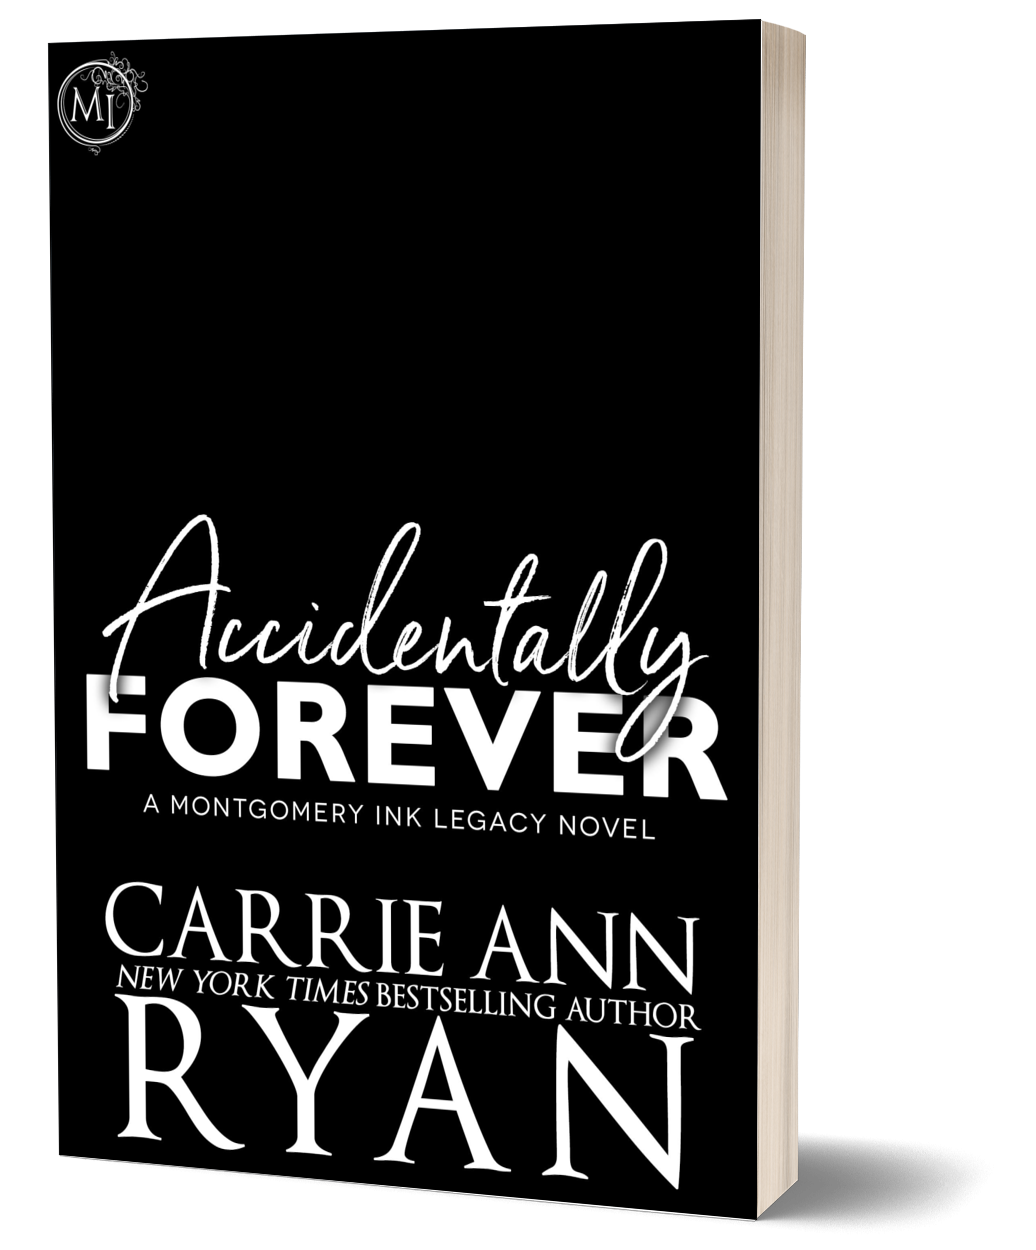 Accidentally Forever Special Edition Paperback *PREORDER*